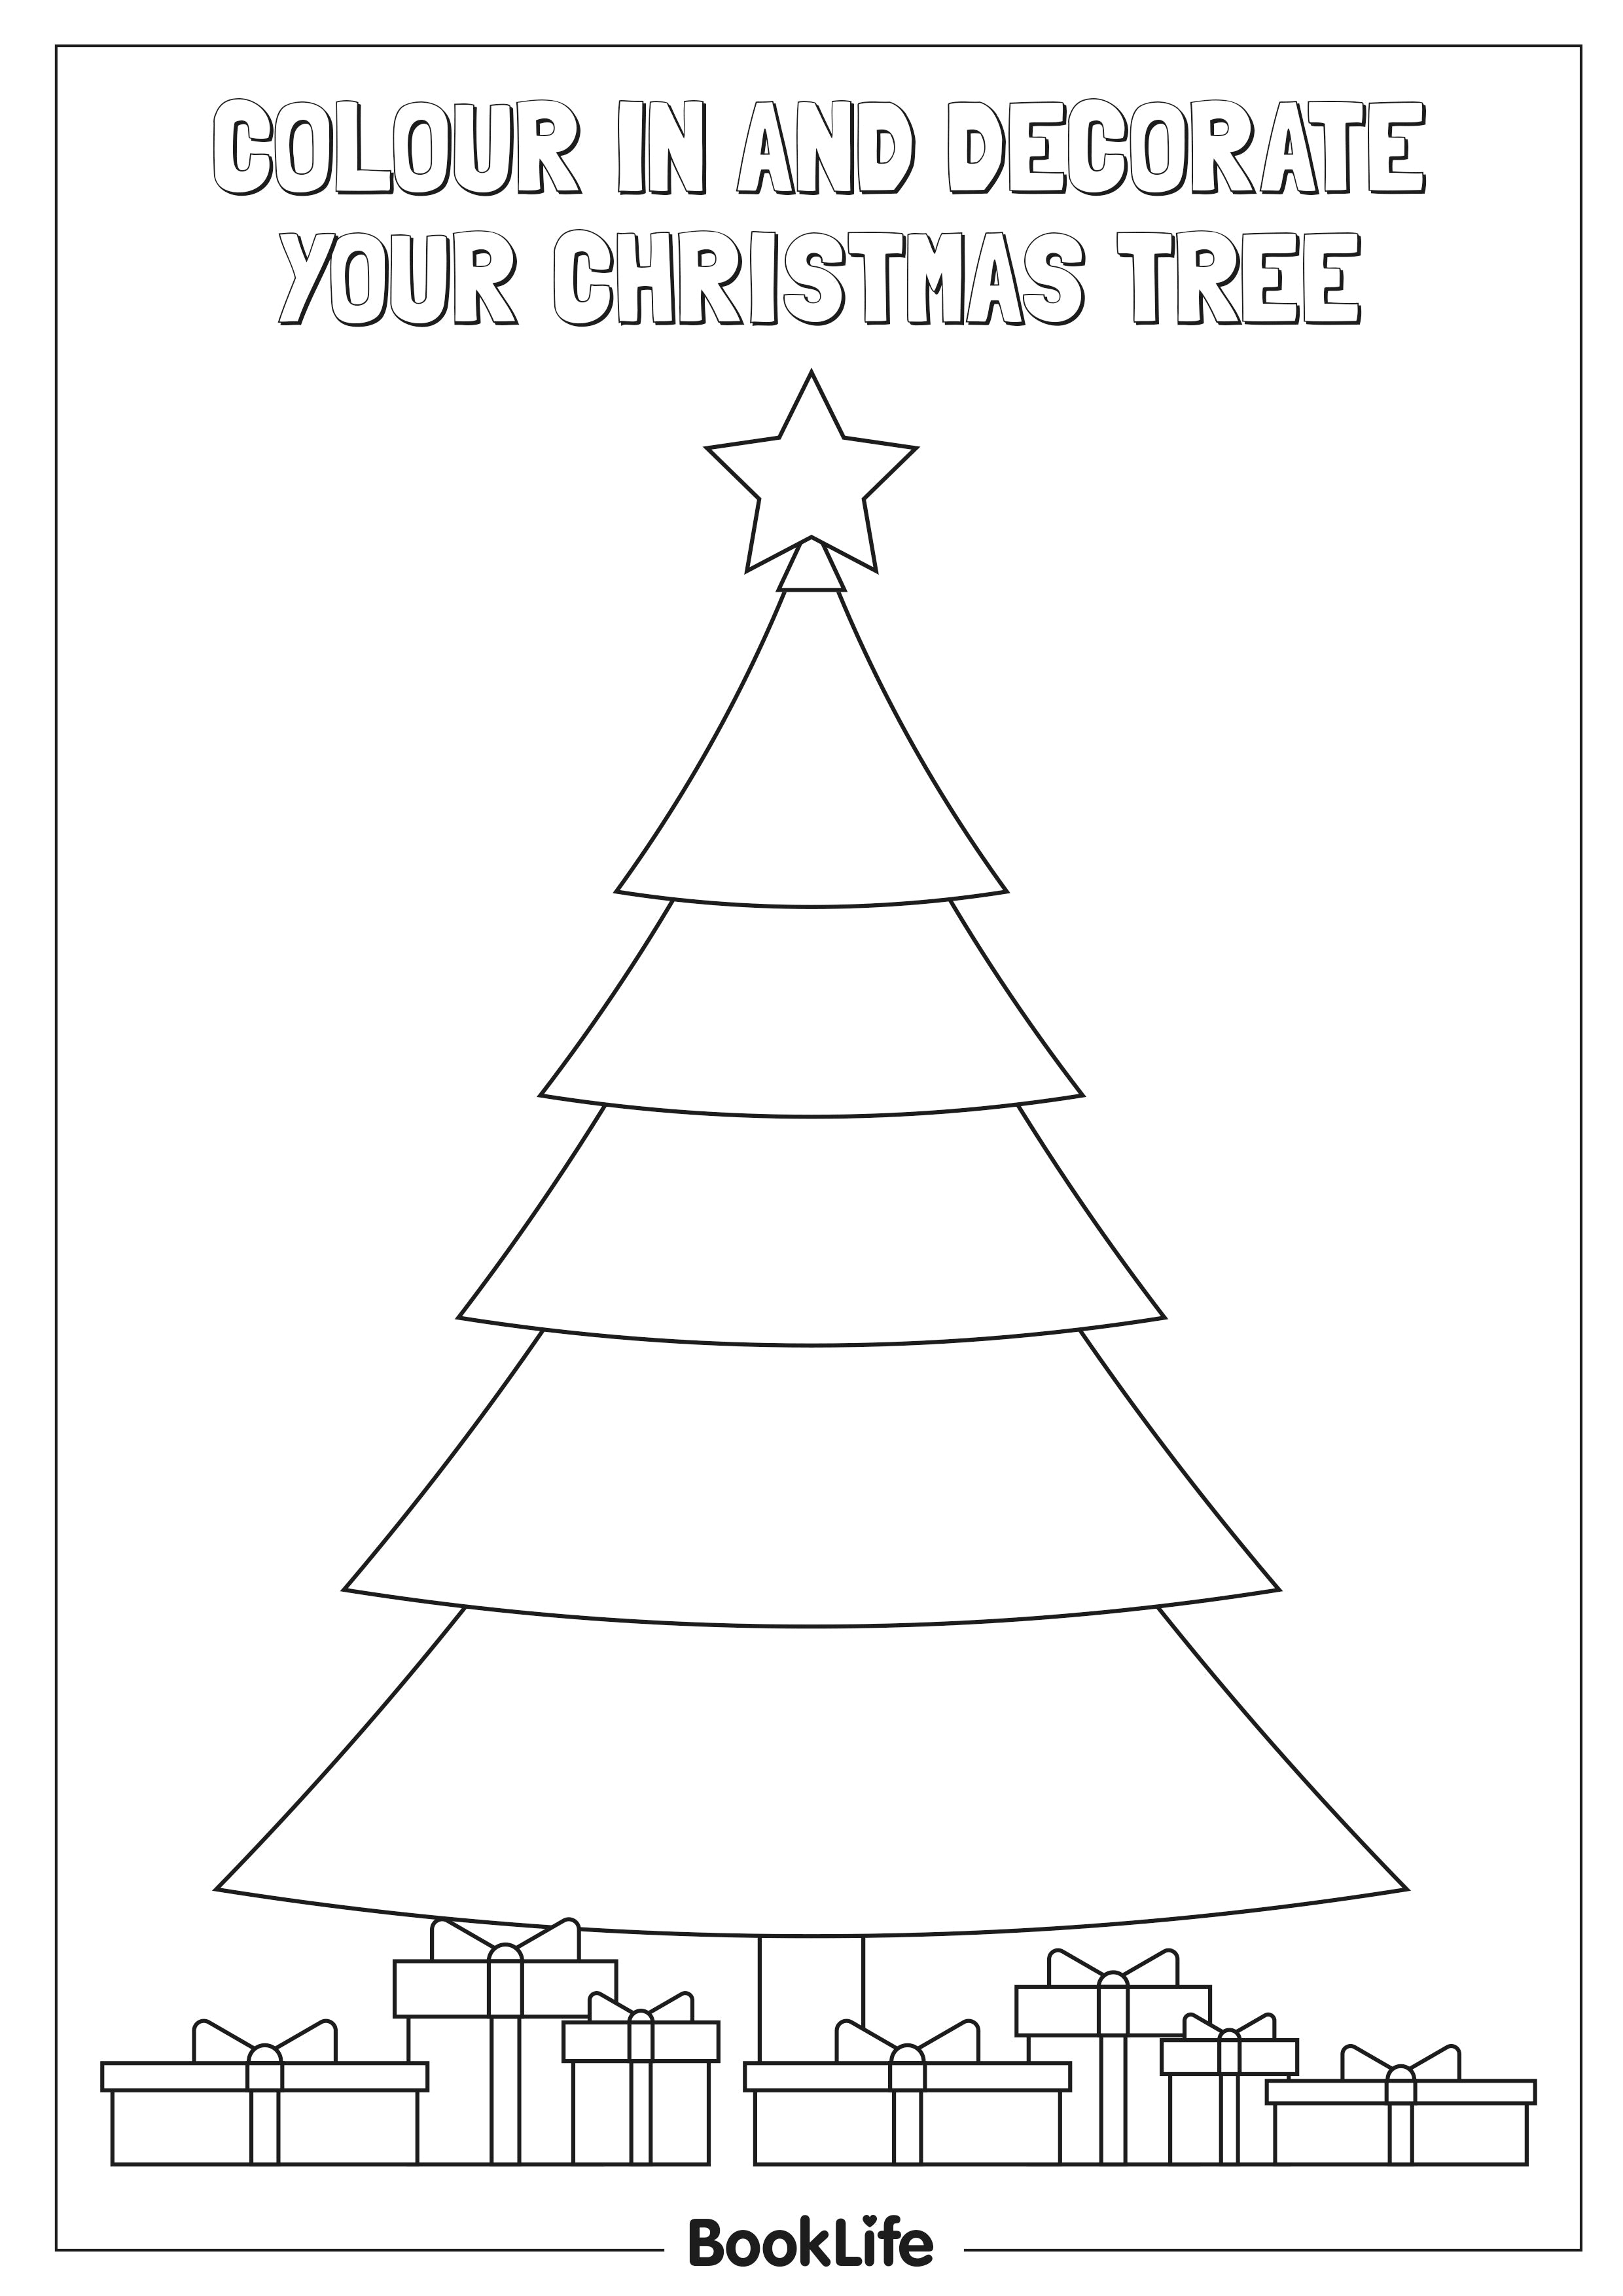 Decorate Your Christmas Tree Activity Sheet